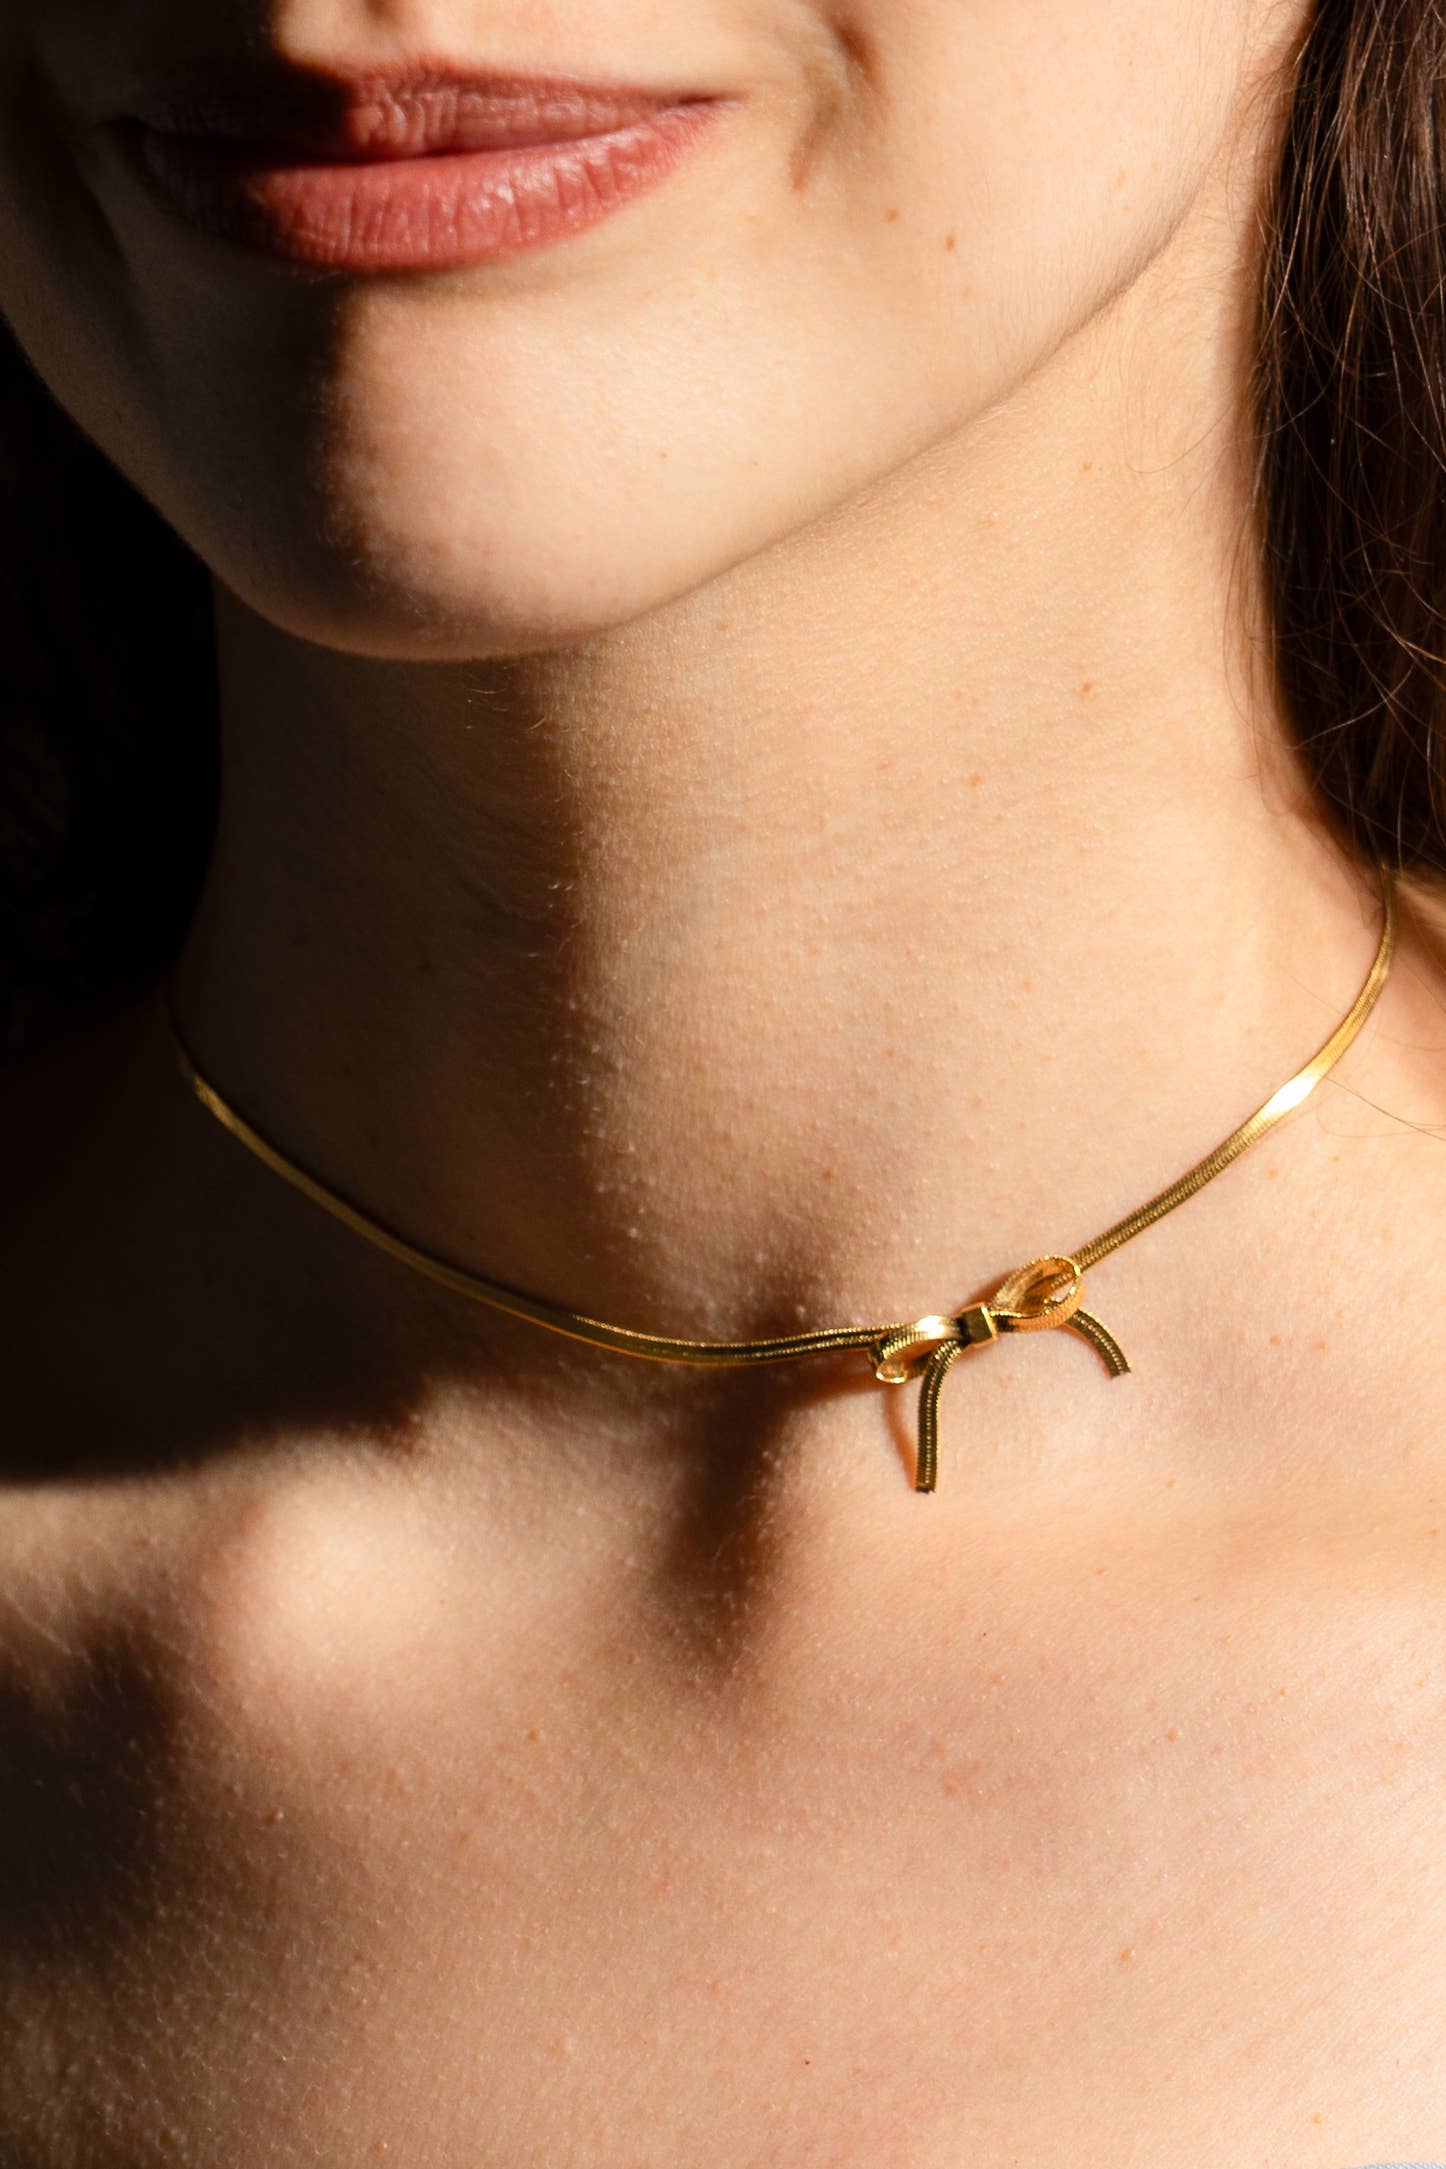 Let it Bow Choker / Necklace - 18K Gold Plated - Out of the Blue